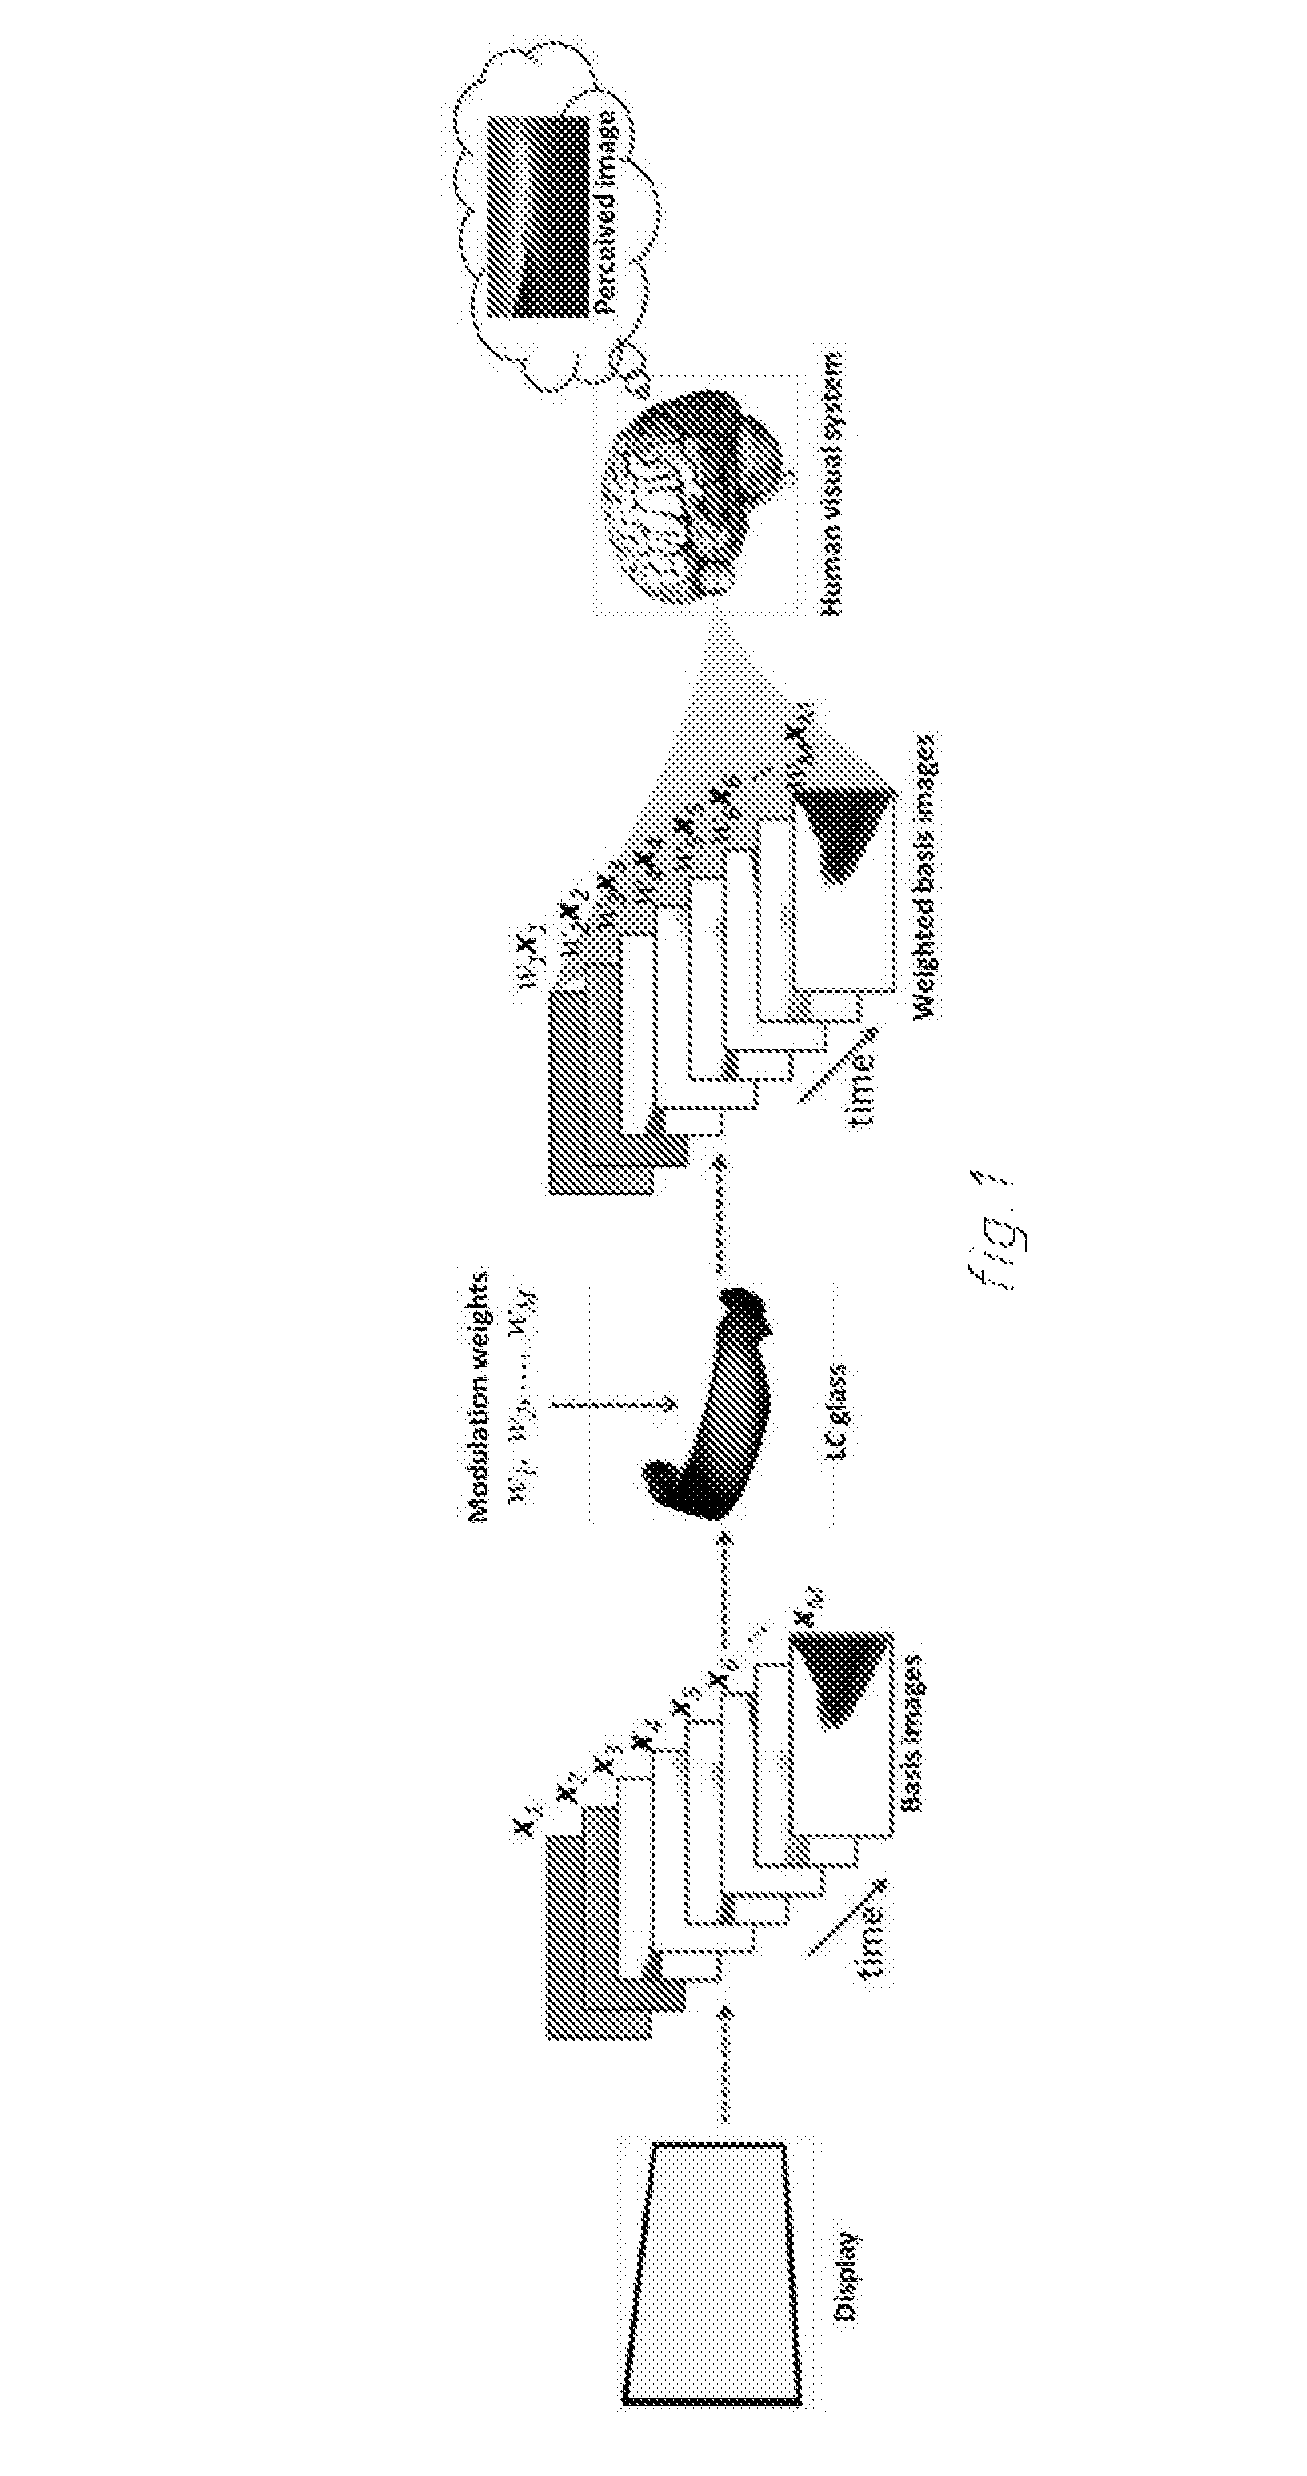 Image/information display system and method based on temporal psycho-visual modulation